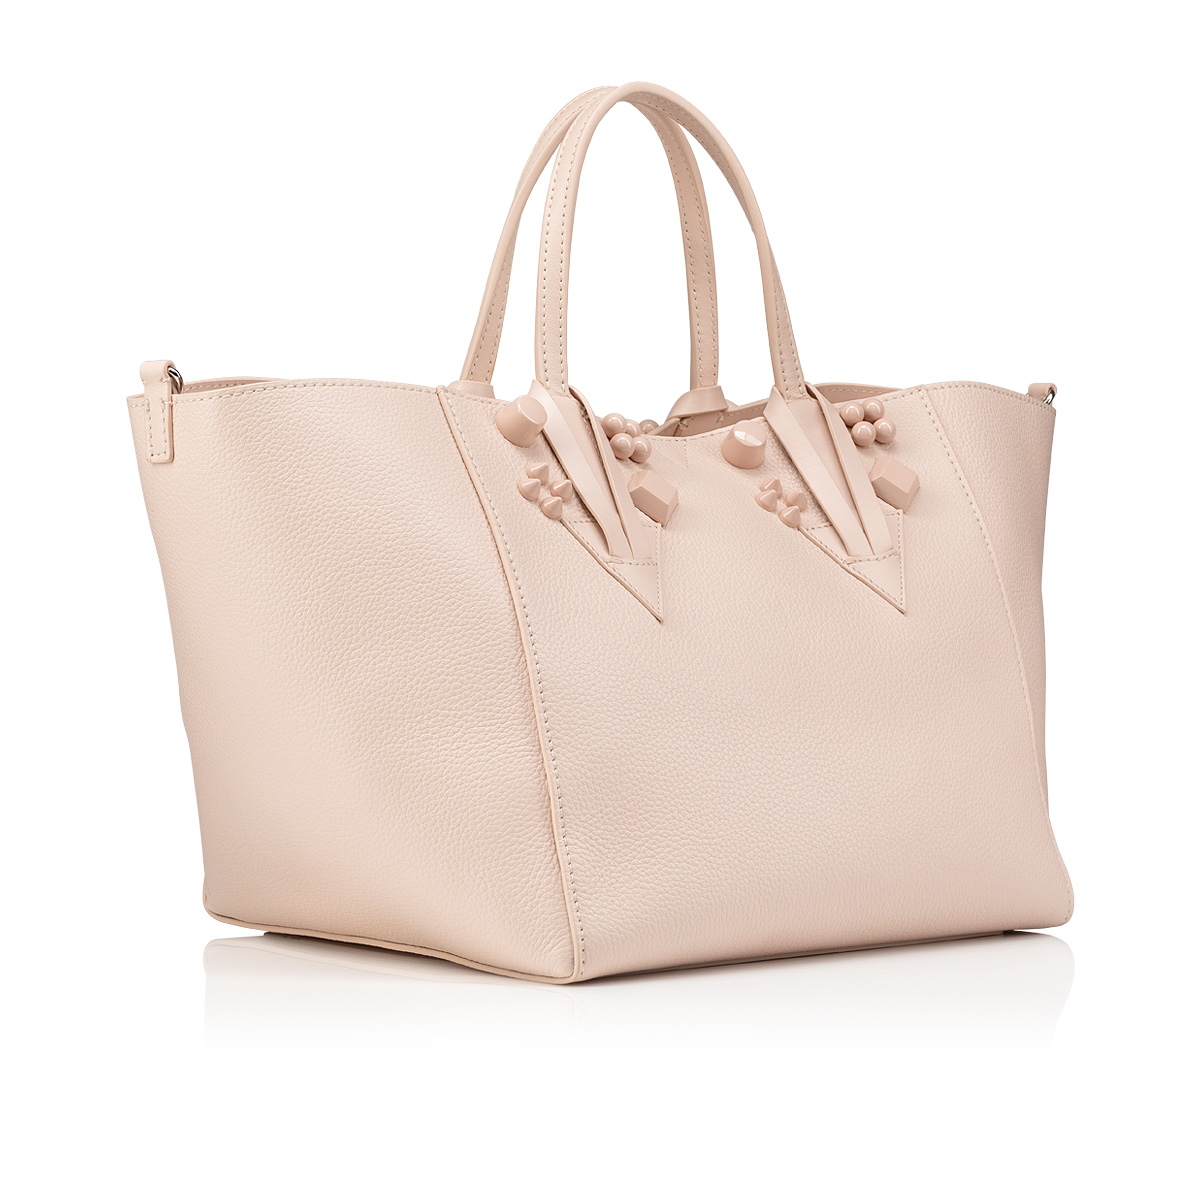 Christian Louboutin Letche Coloured Leather Tote Bag in Pink